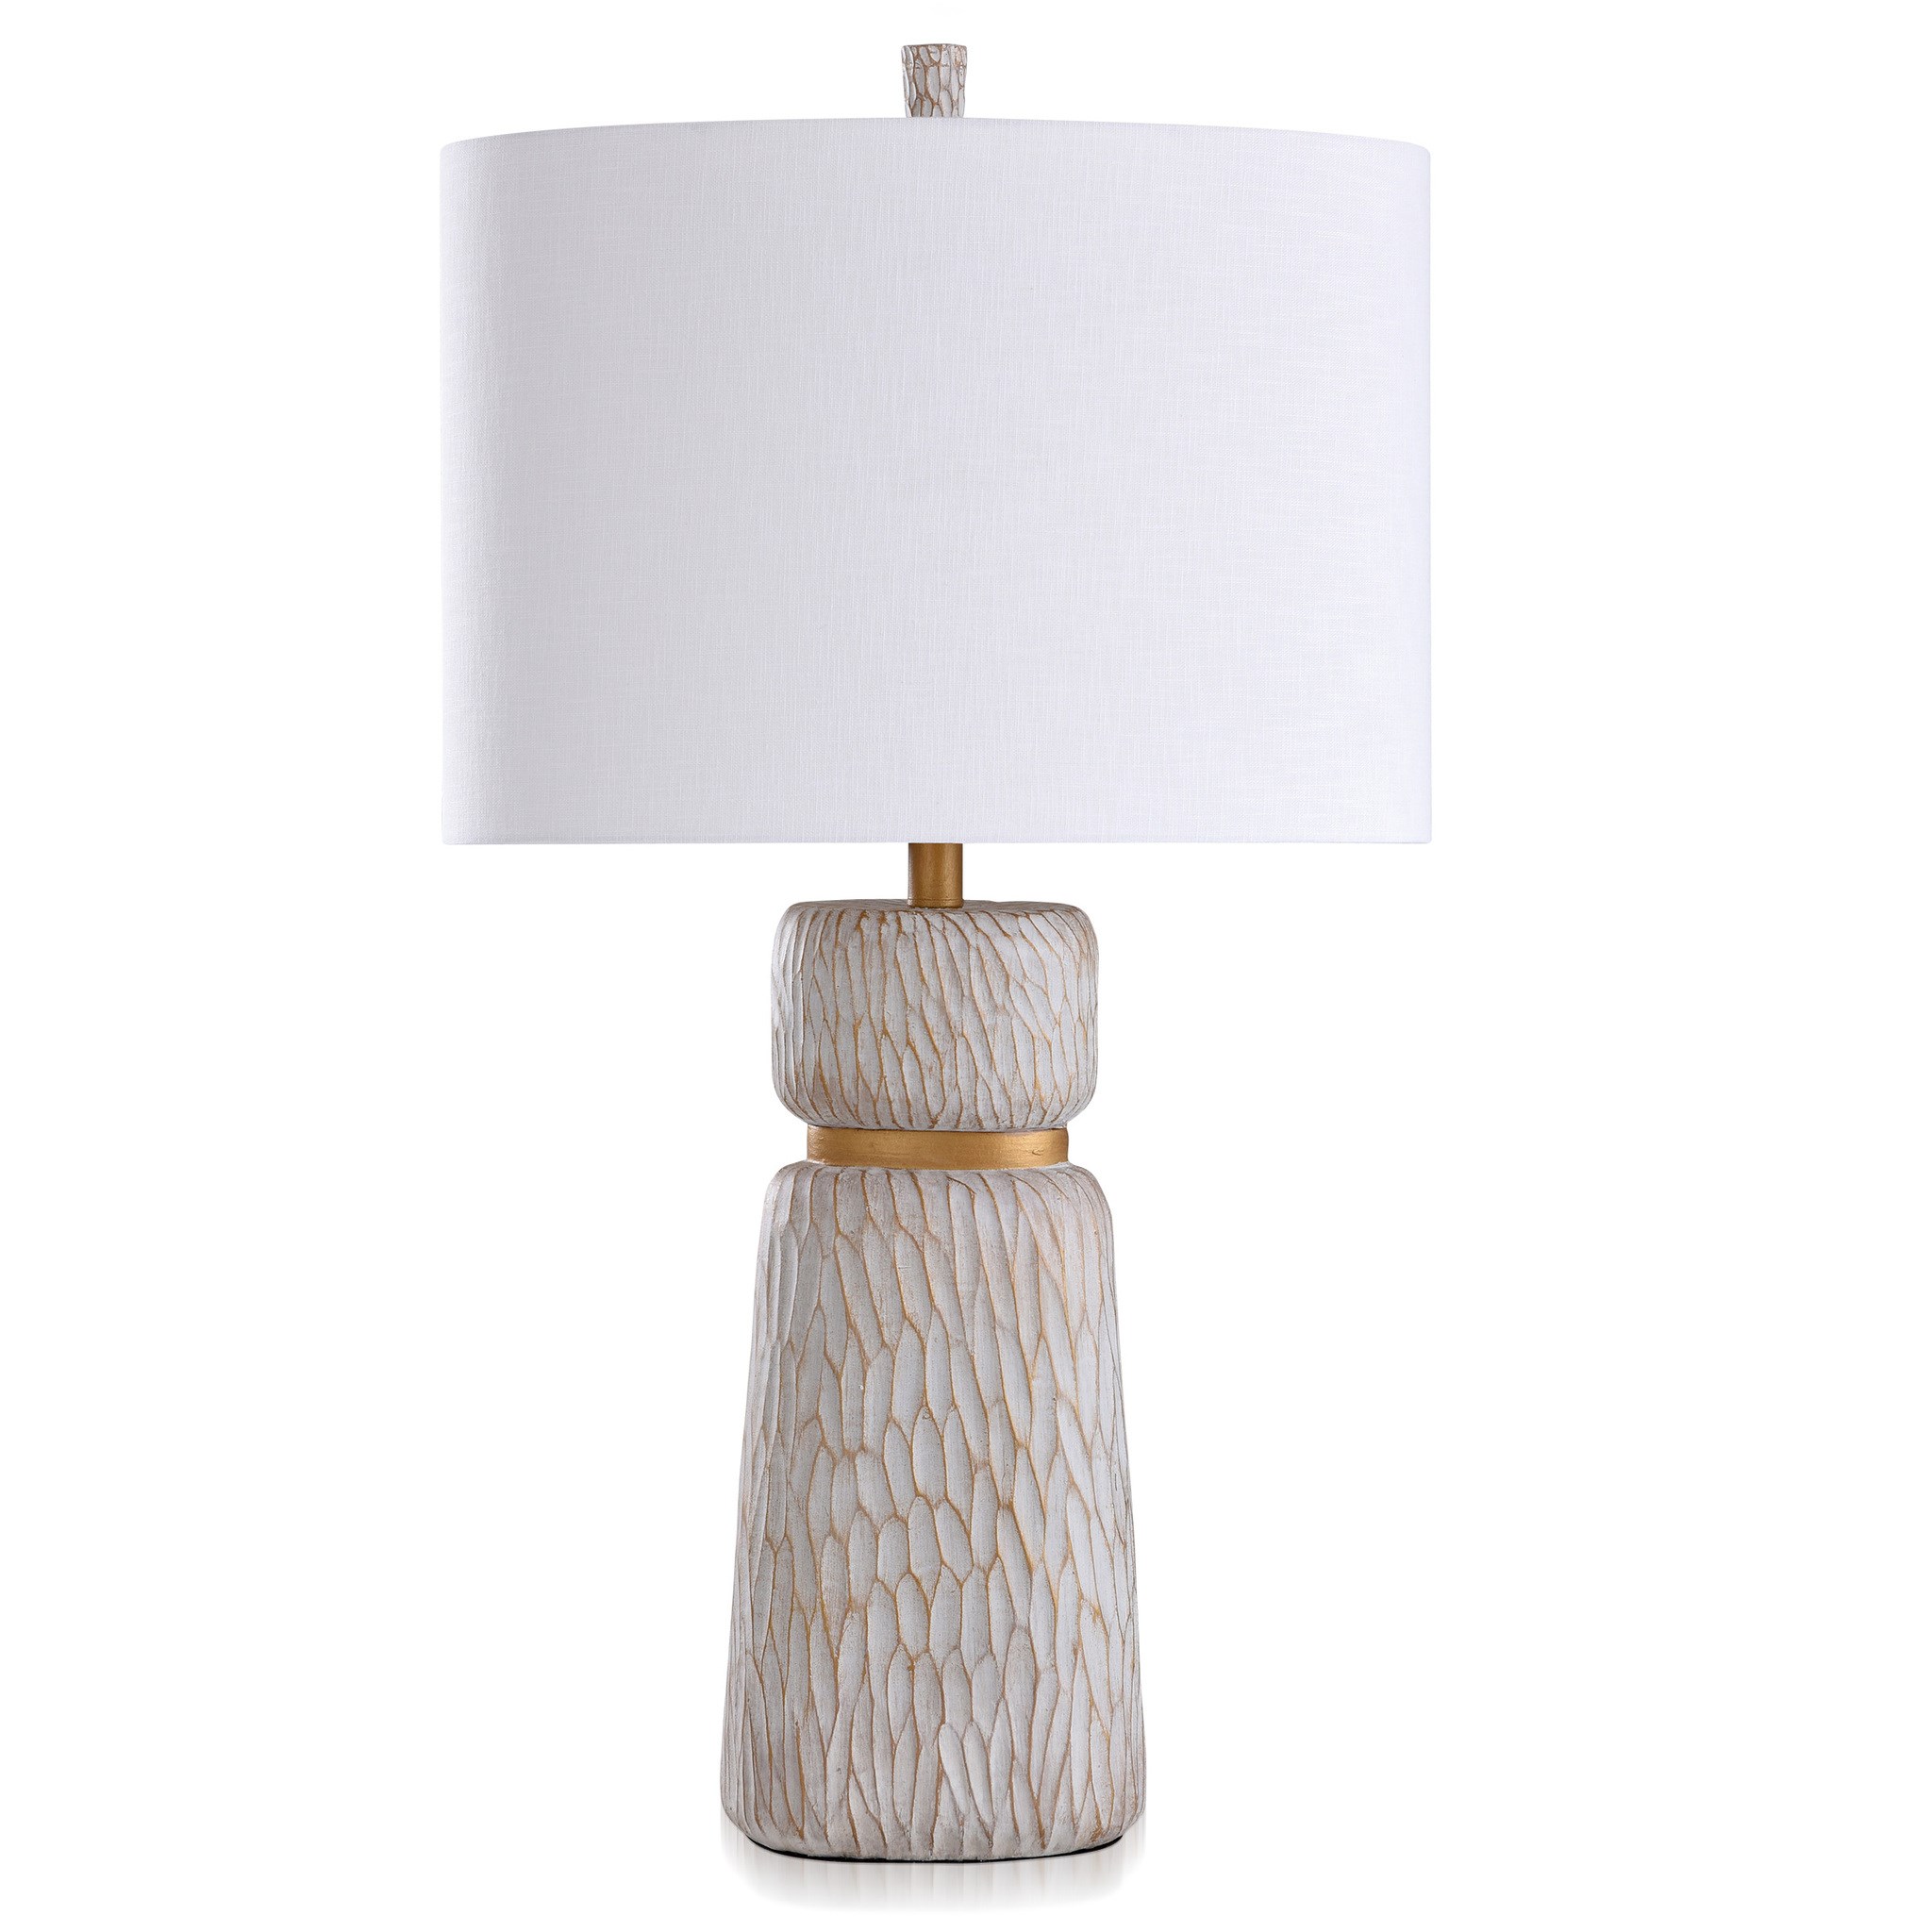 ROANOKE & DUNBROOK Casual Table Lamp finished in Ivory & Gold Made in Cambodia 18in w X